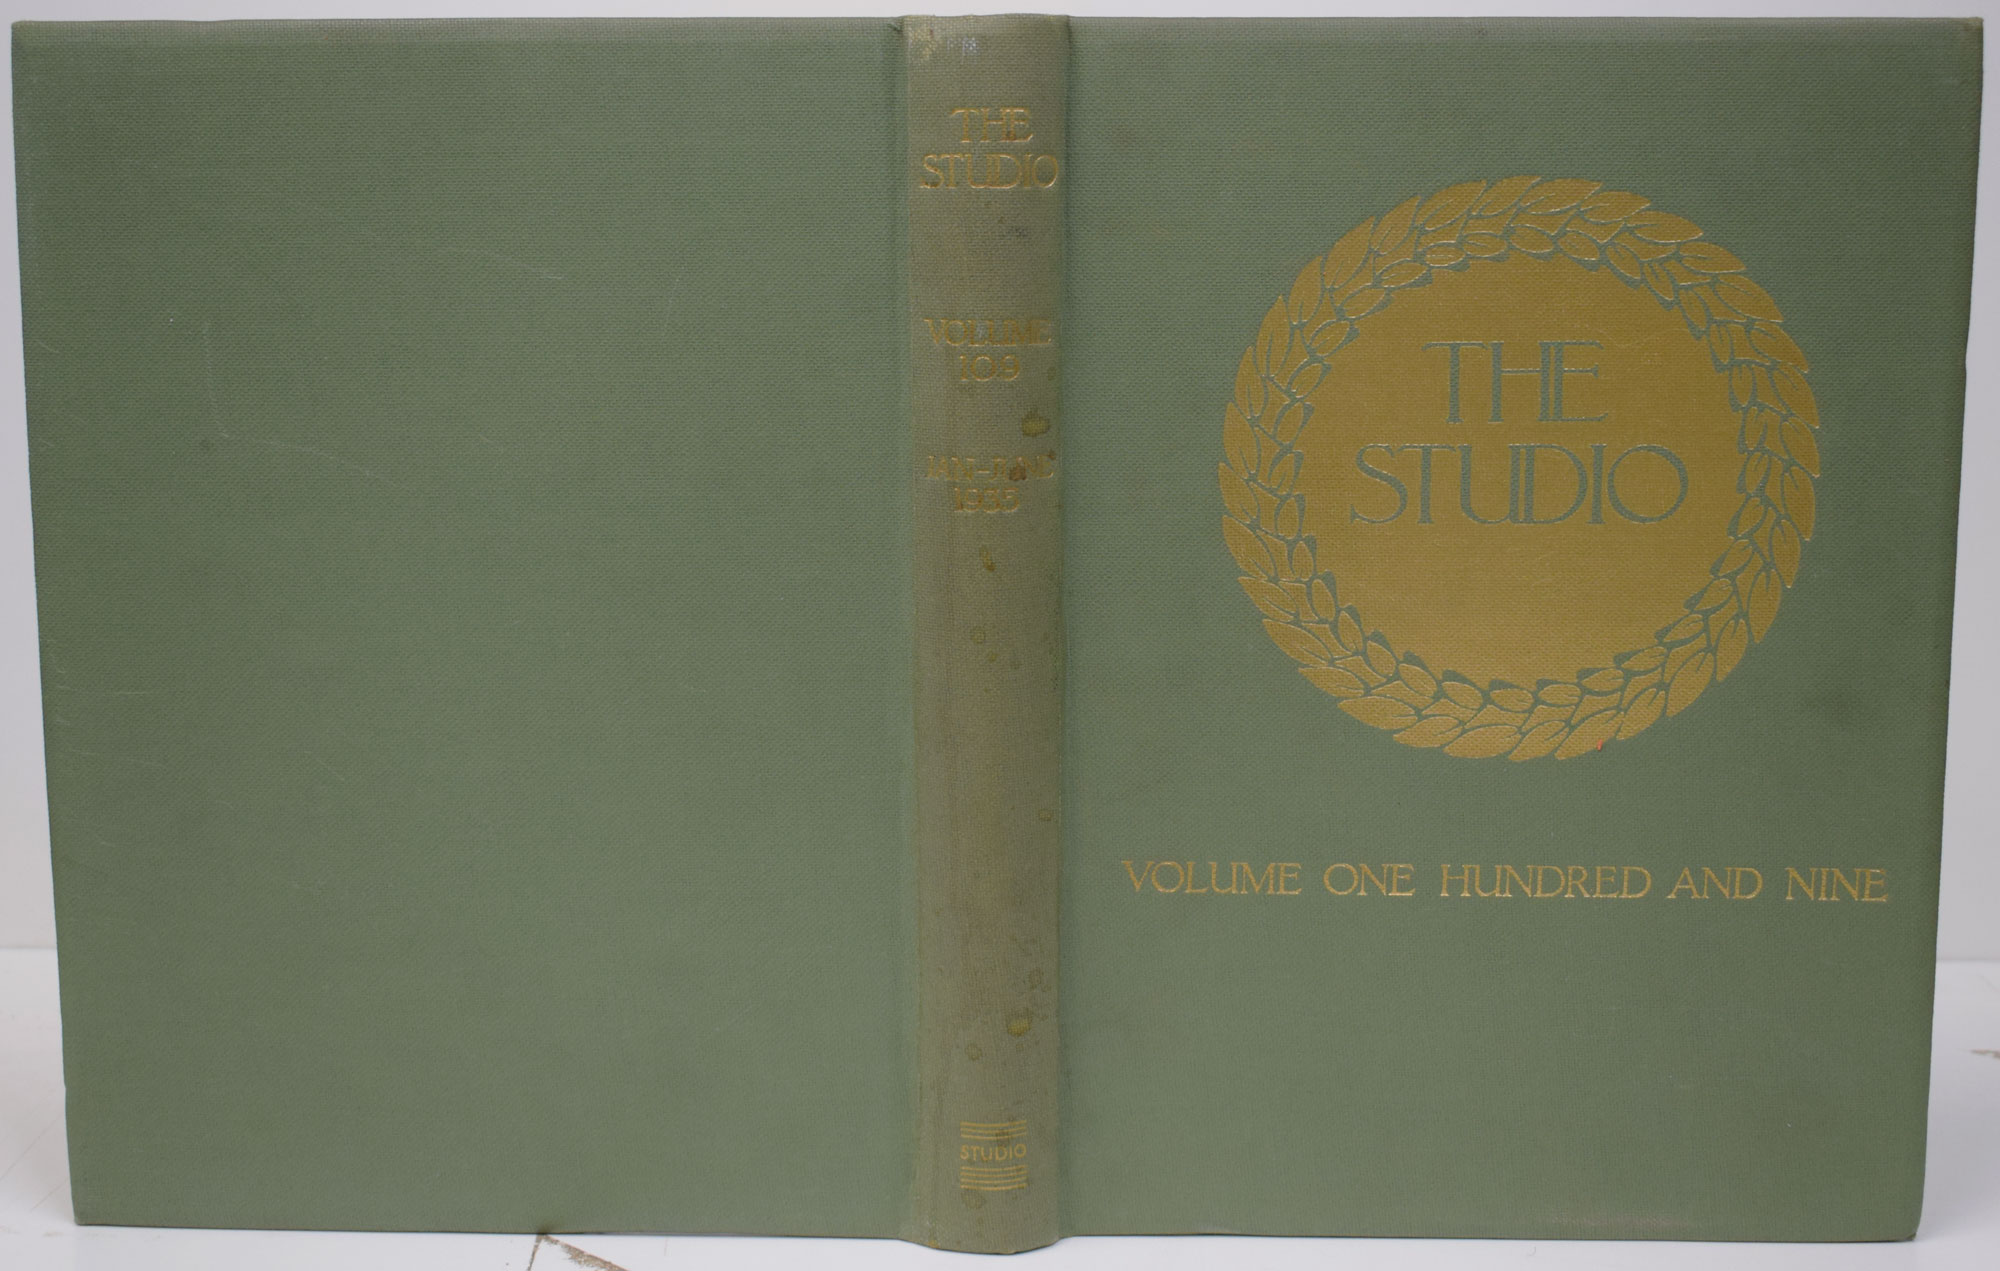 HOLME, C GEOFFREY [ED.] - The Studio: An Illustrated Magazine of Fine and Applied Art. Volume 109. January-June 1935